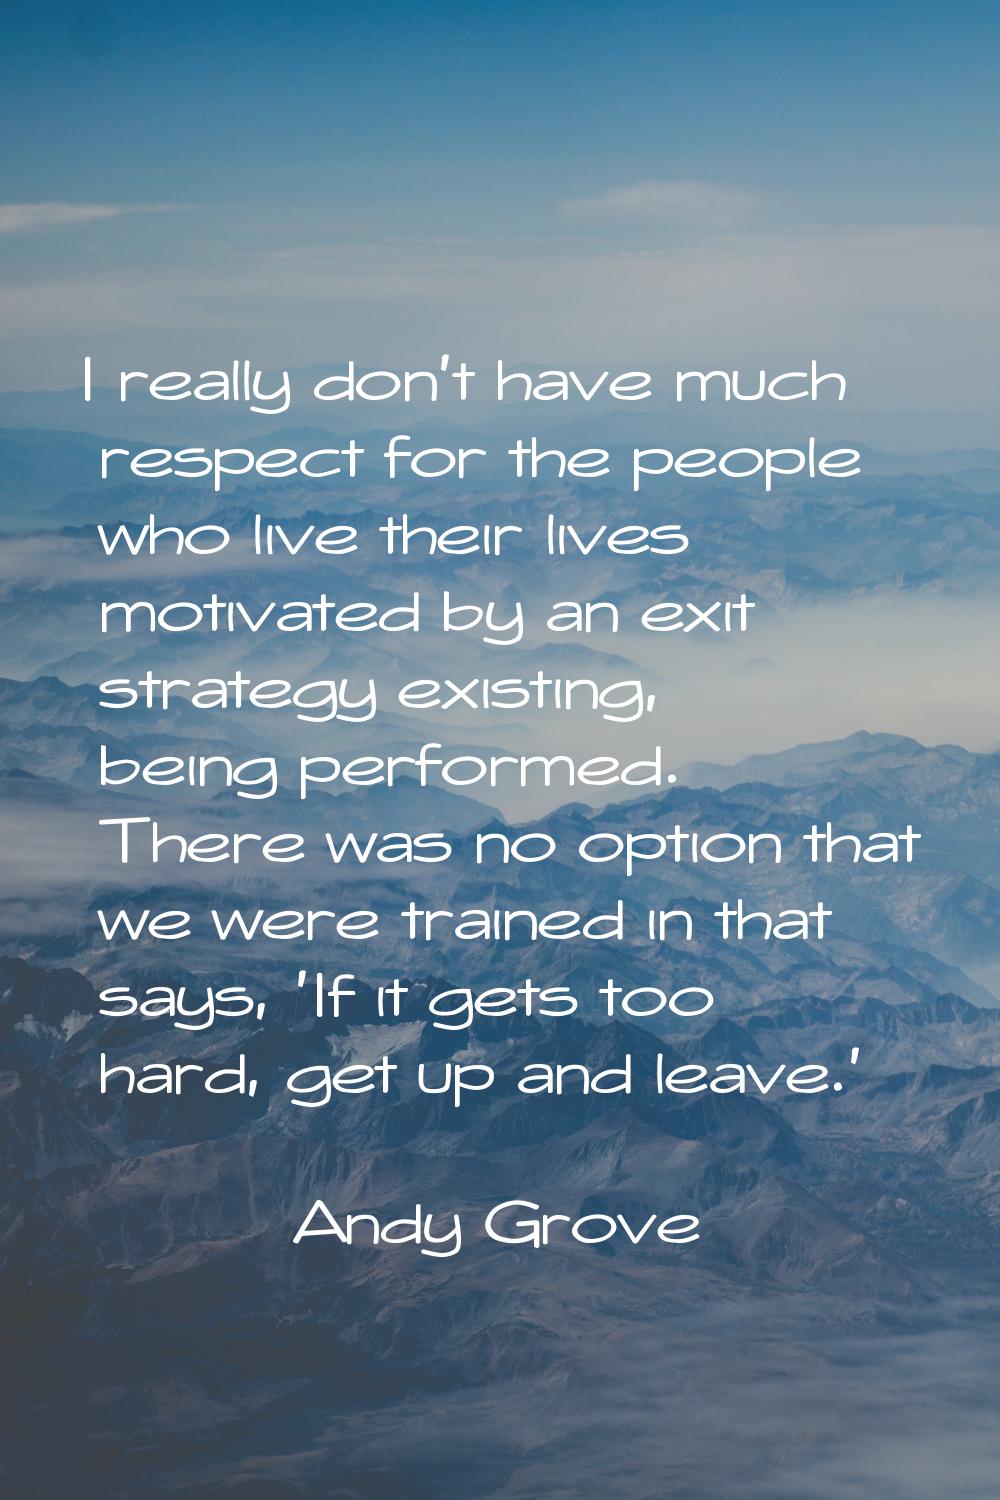 I really don't have much respect for the people who live their lives motivated by an exit strategy 